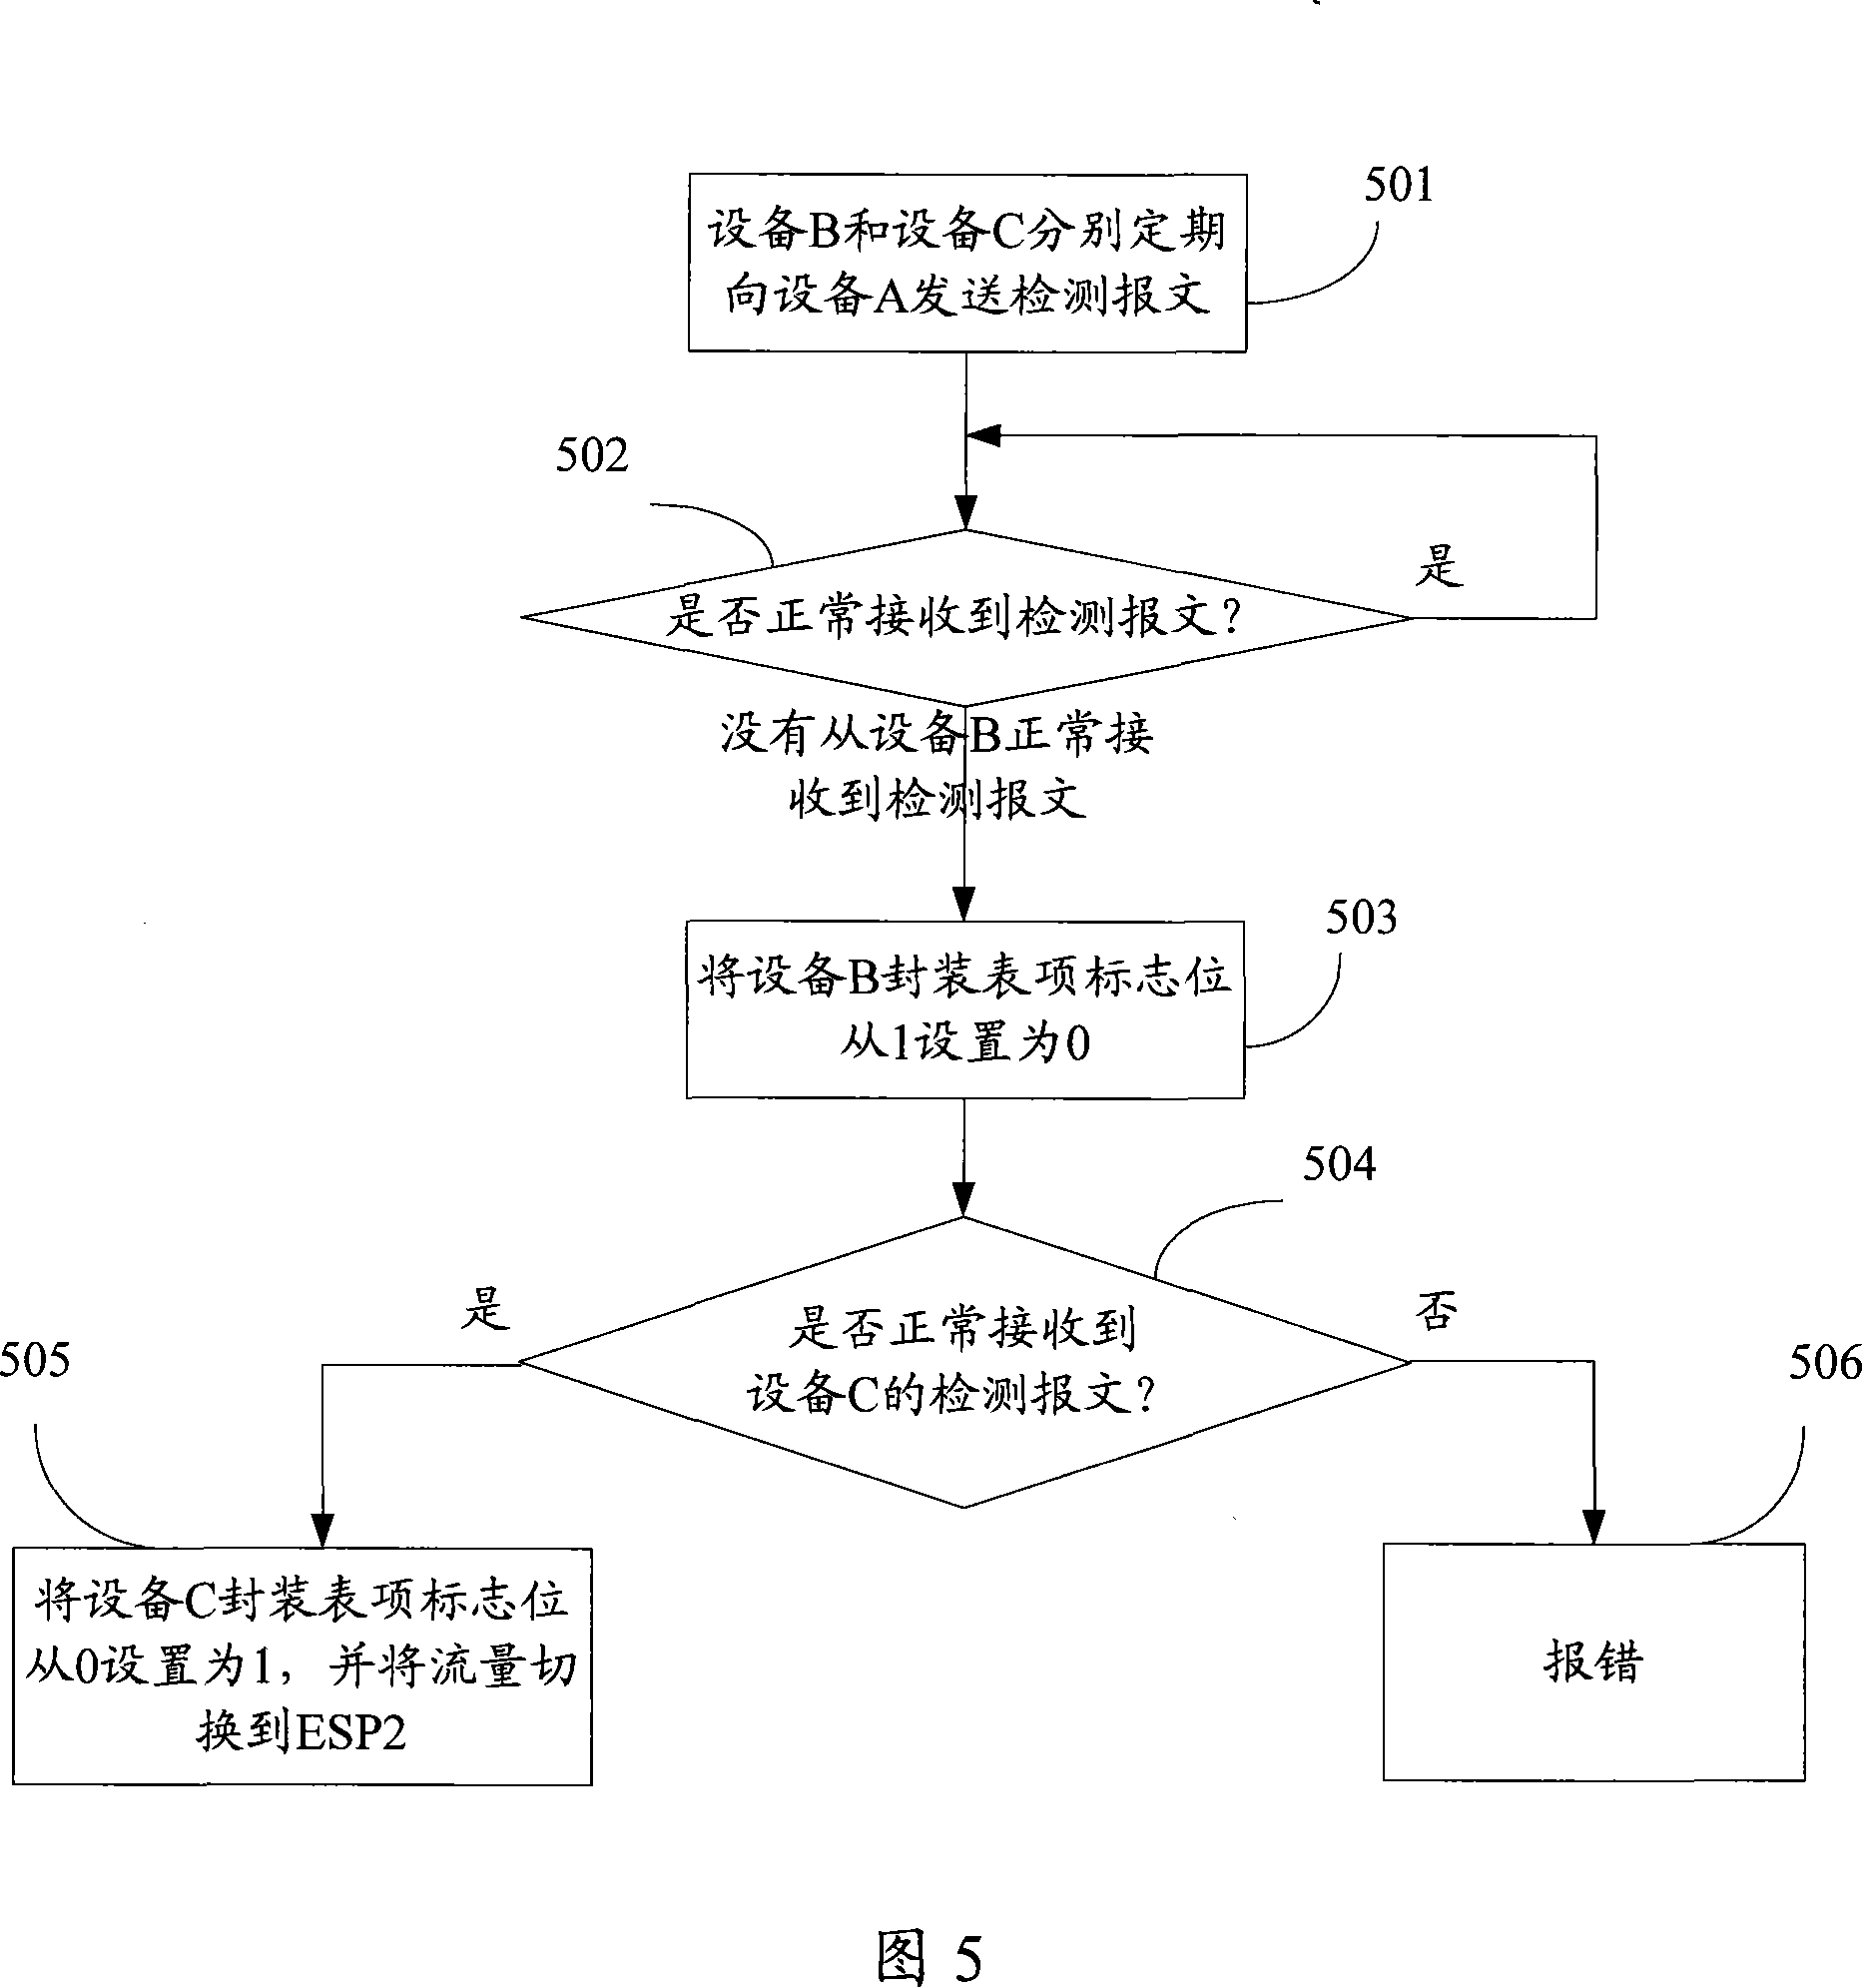 PBT network flow control method and apparatus